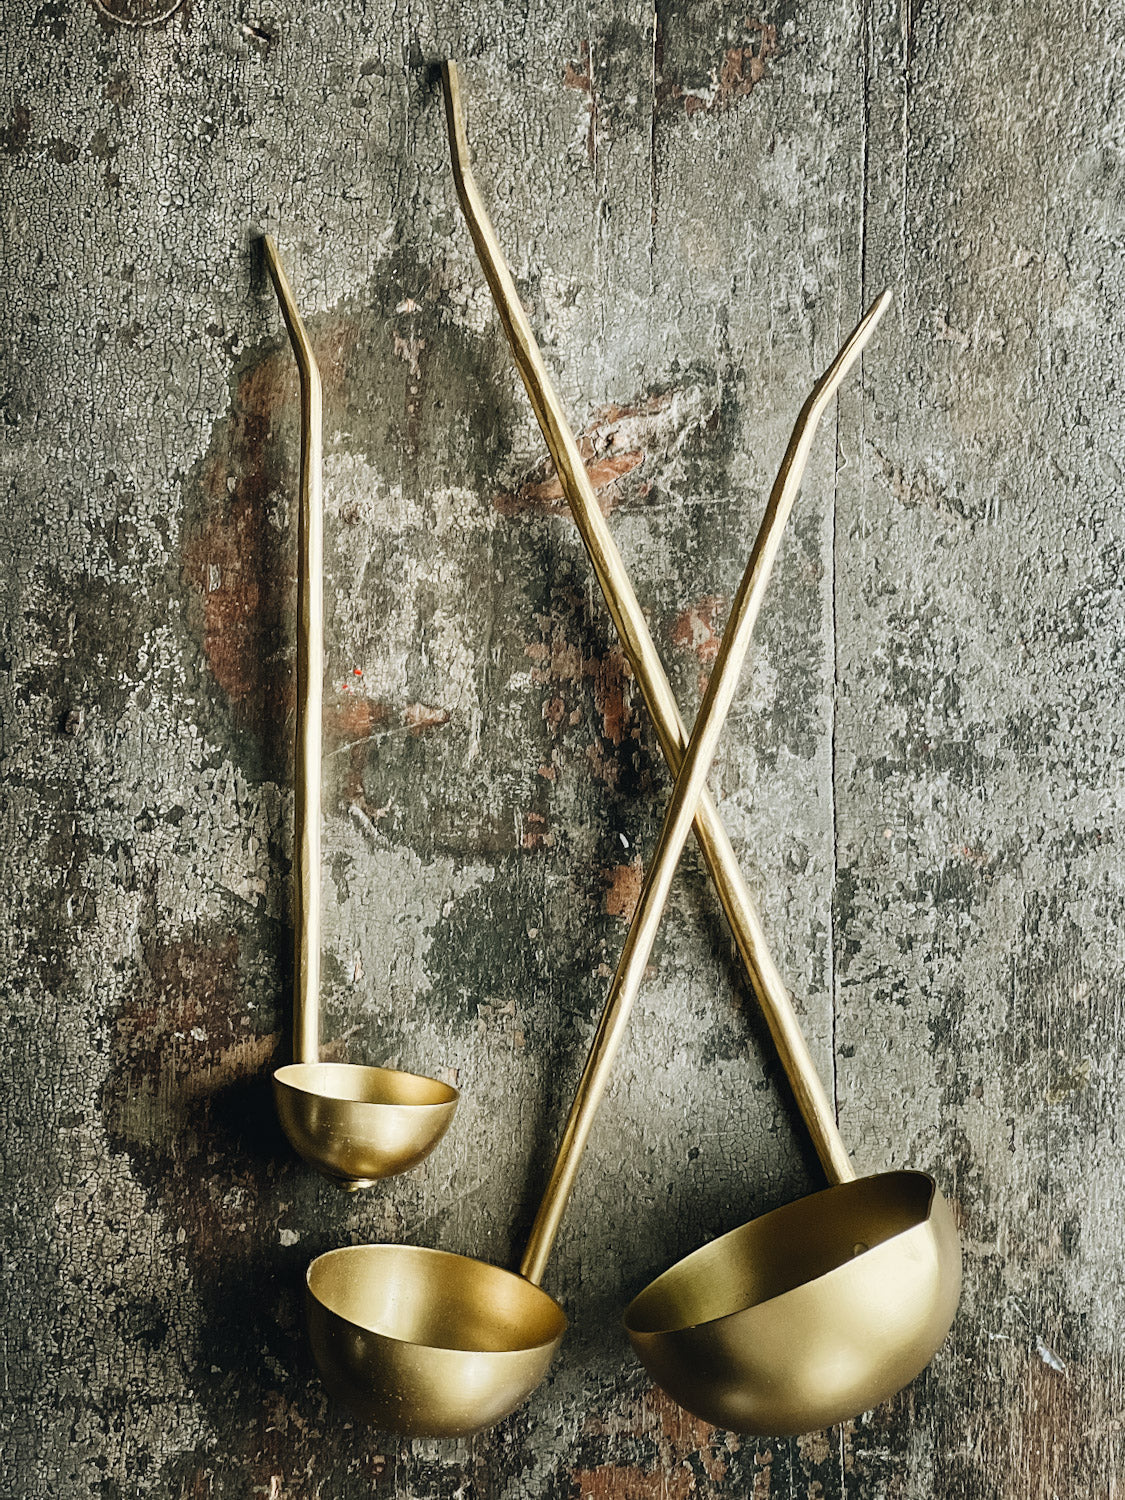 Forged Brass Ladles, Set of 3